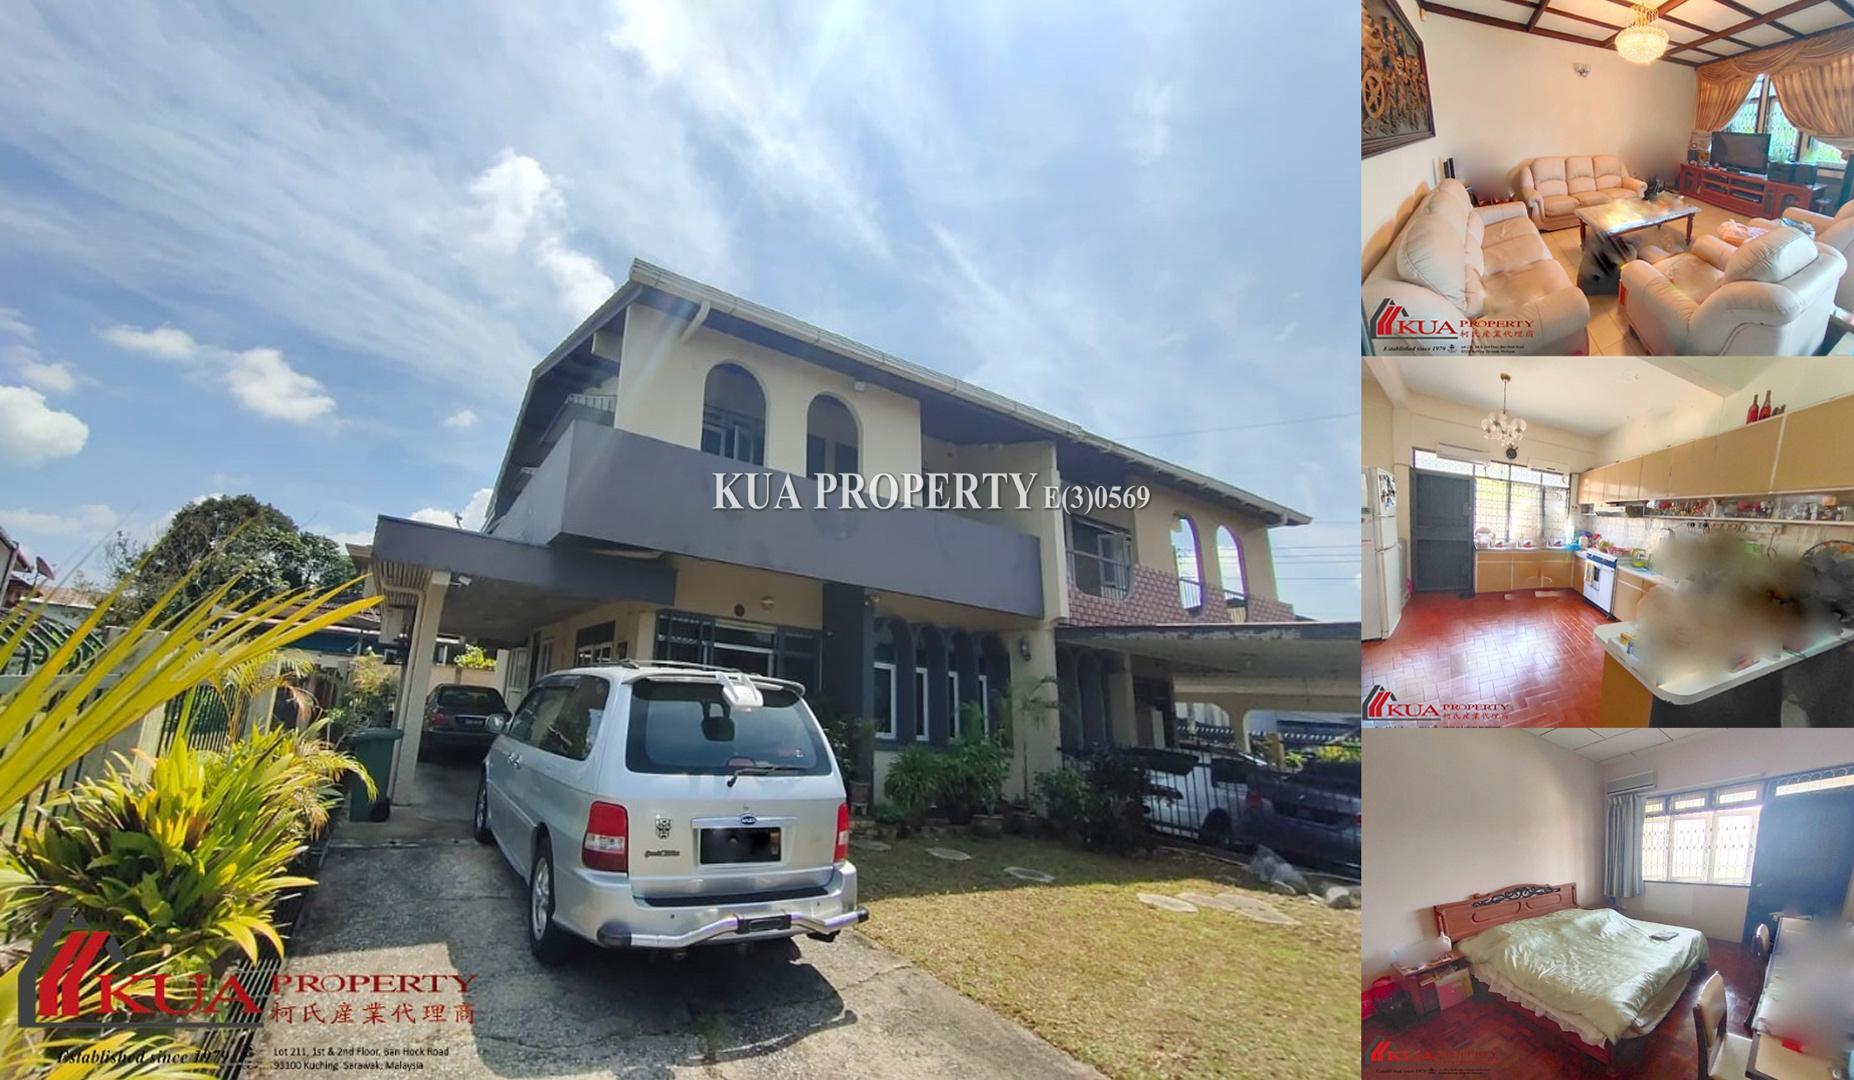 Double Storey Semi-Detached House For Sale! at Sungai Maong Hilir, Kuching